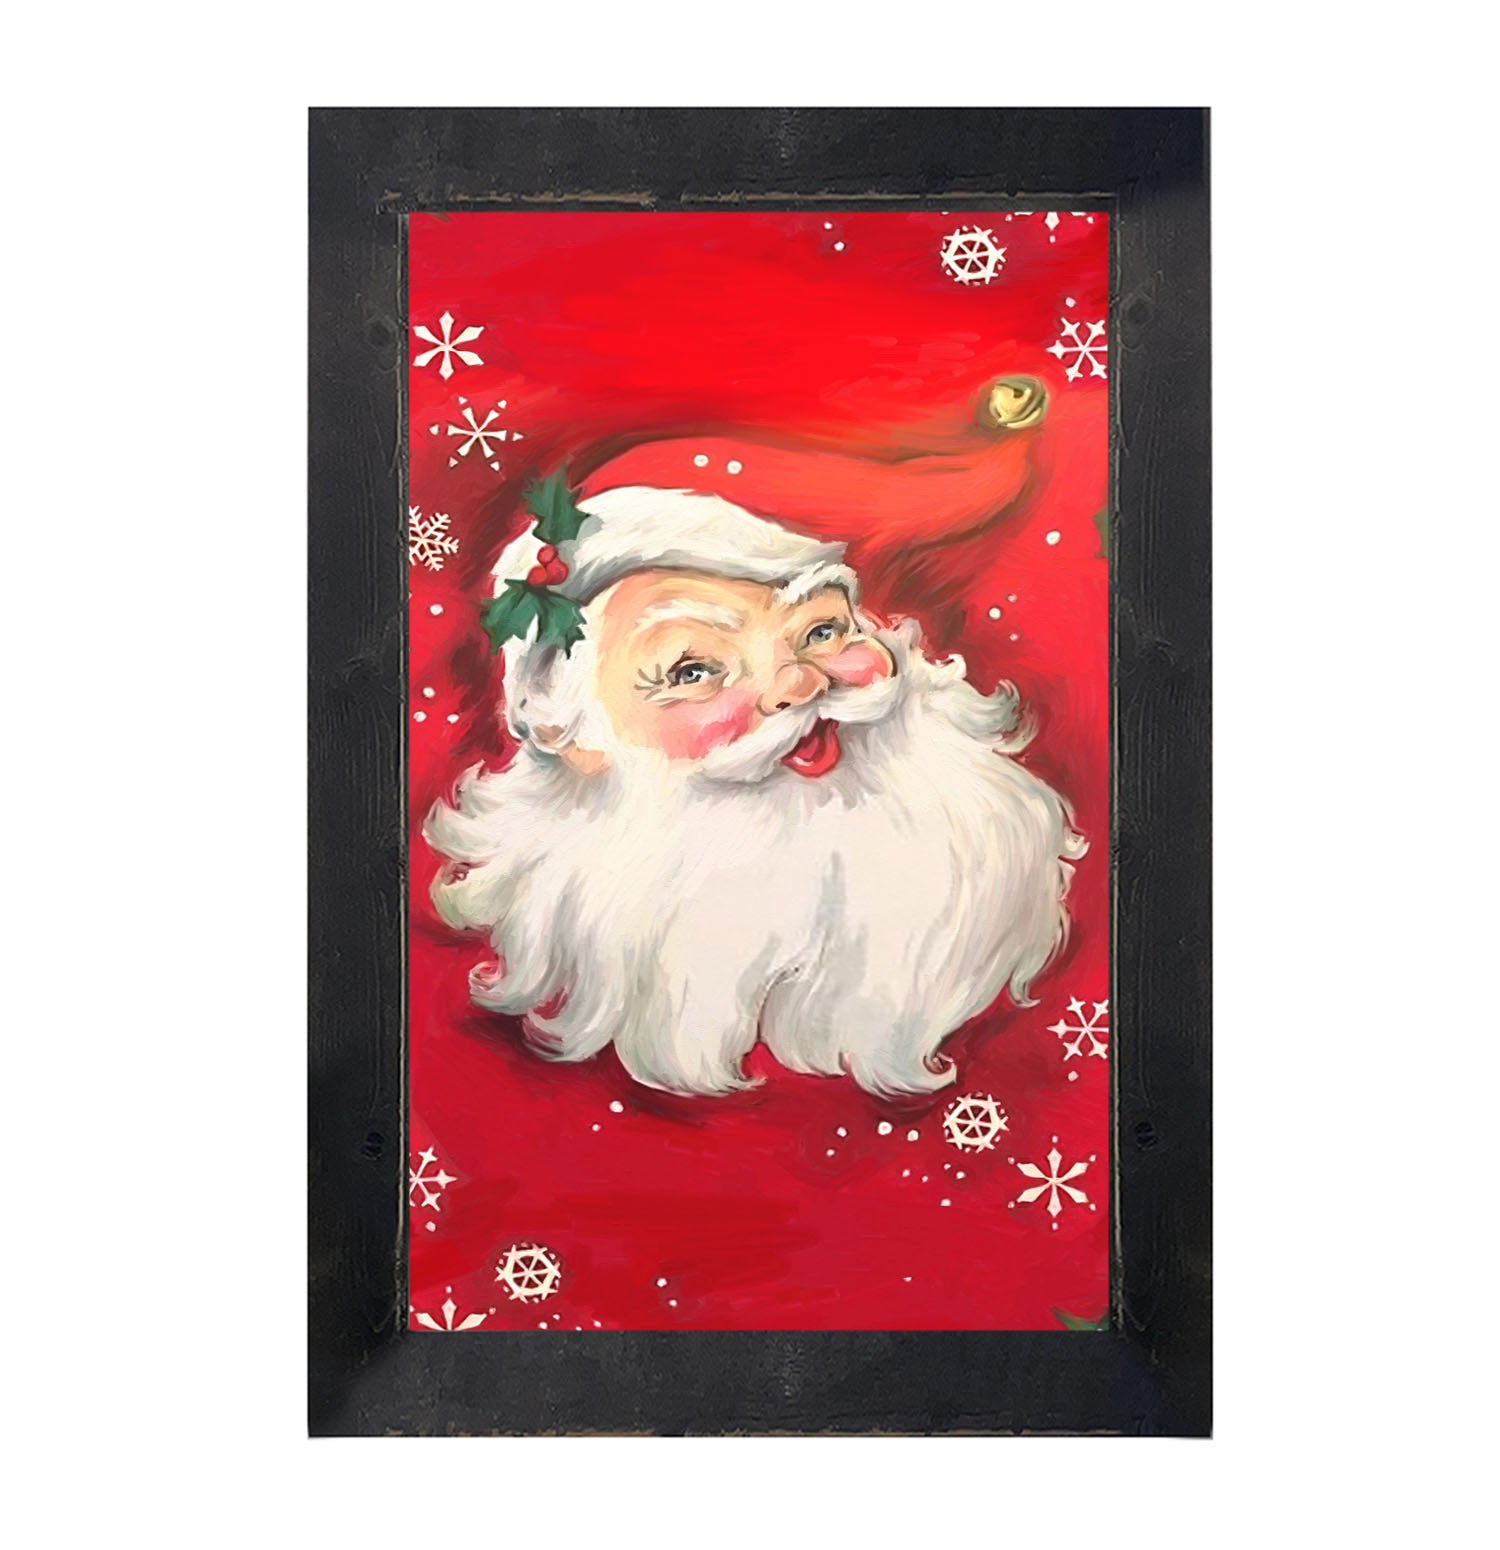 Red Santa with snowflakes